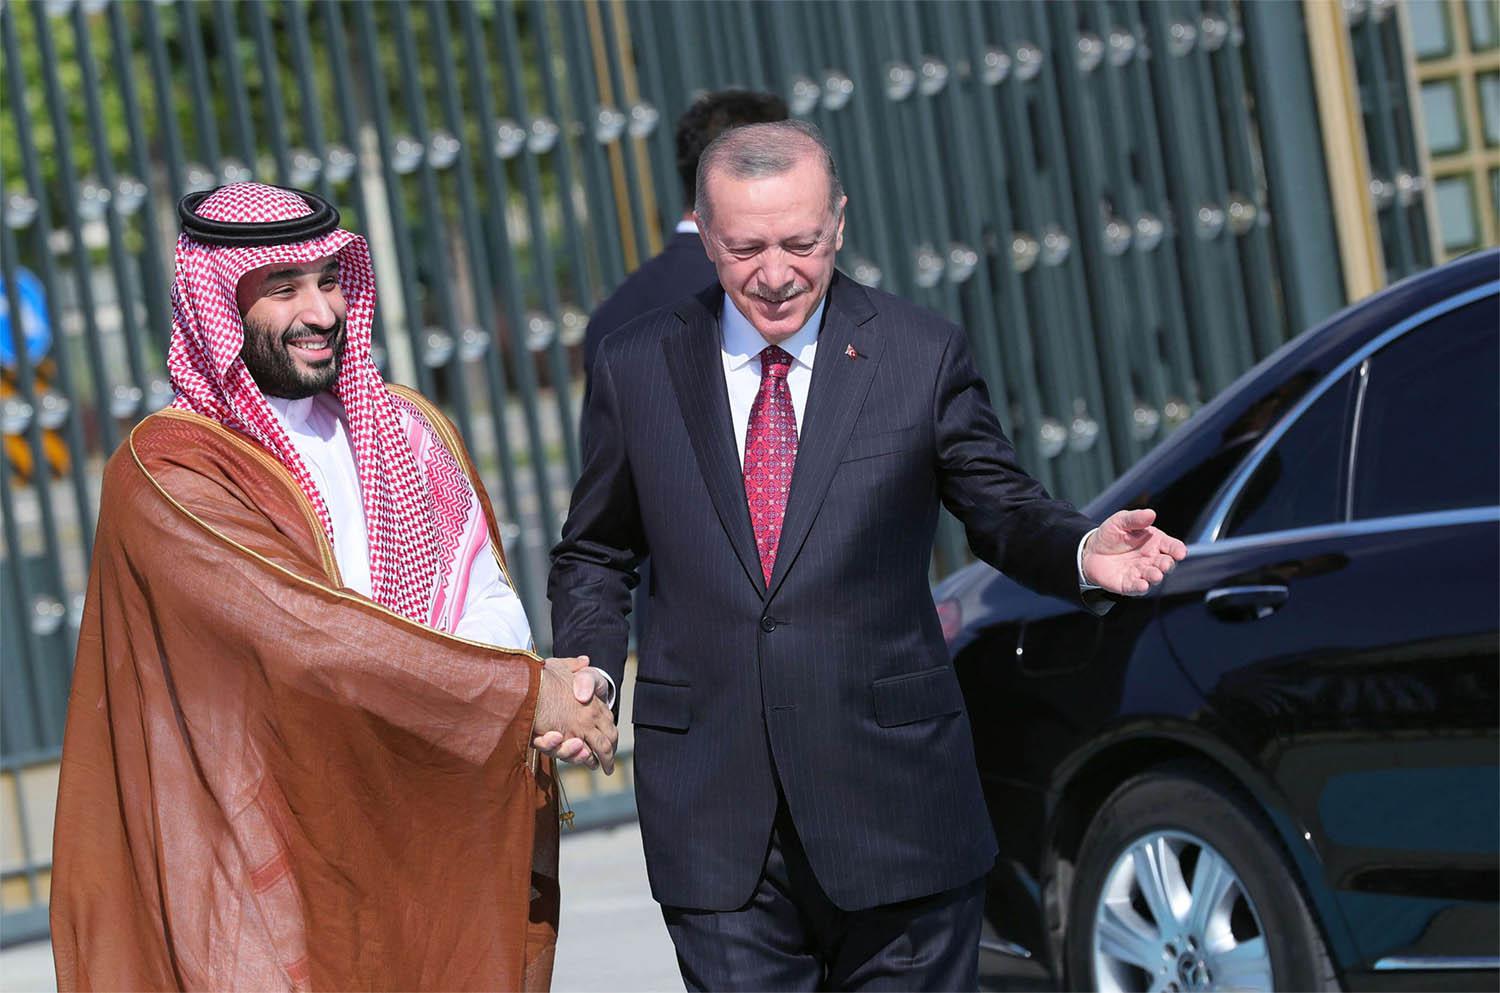 Erdogan welcomed Prince Mohammed at the presidential palace in Ankara